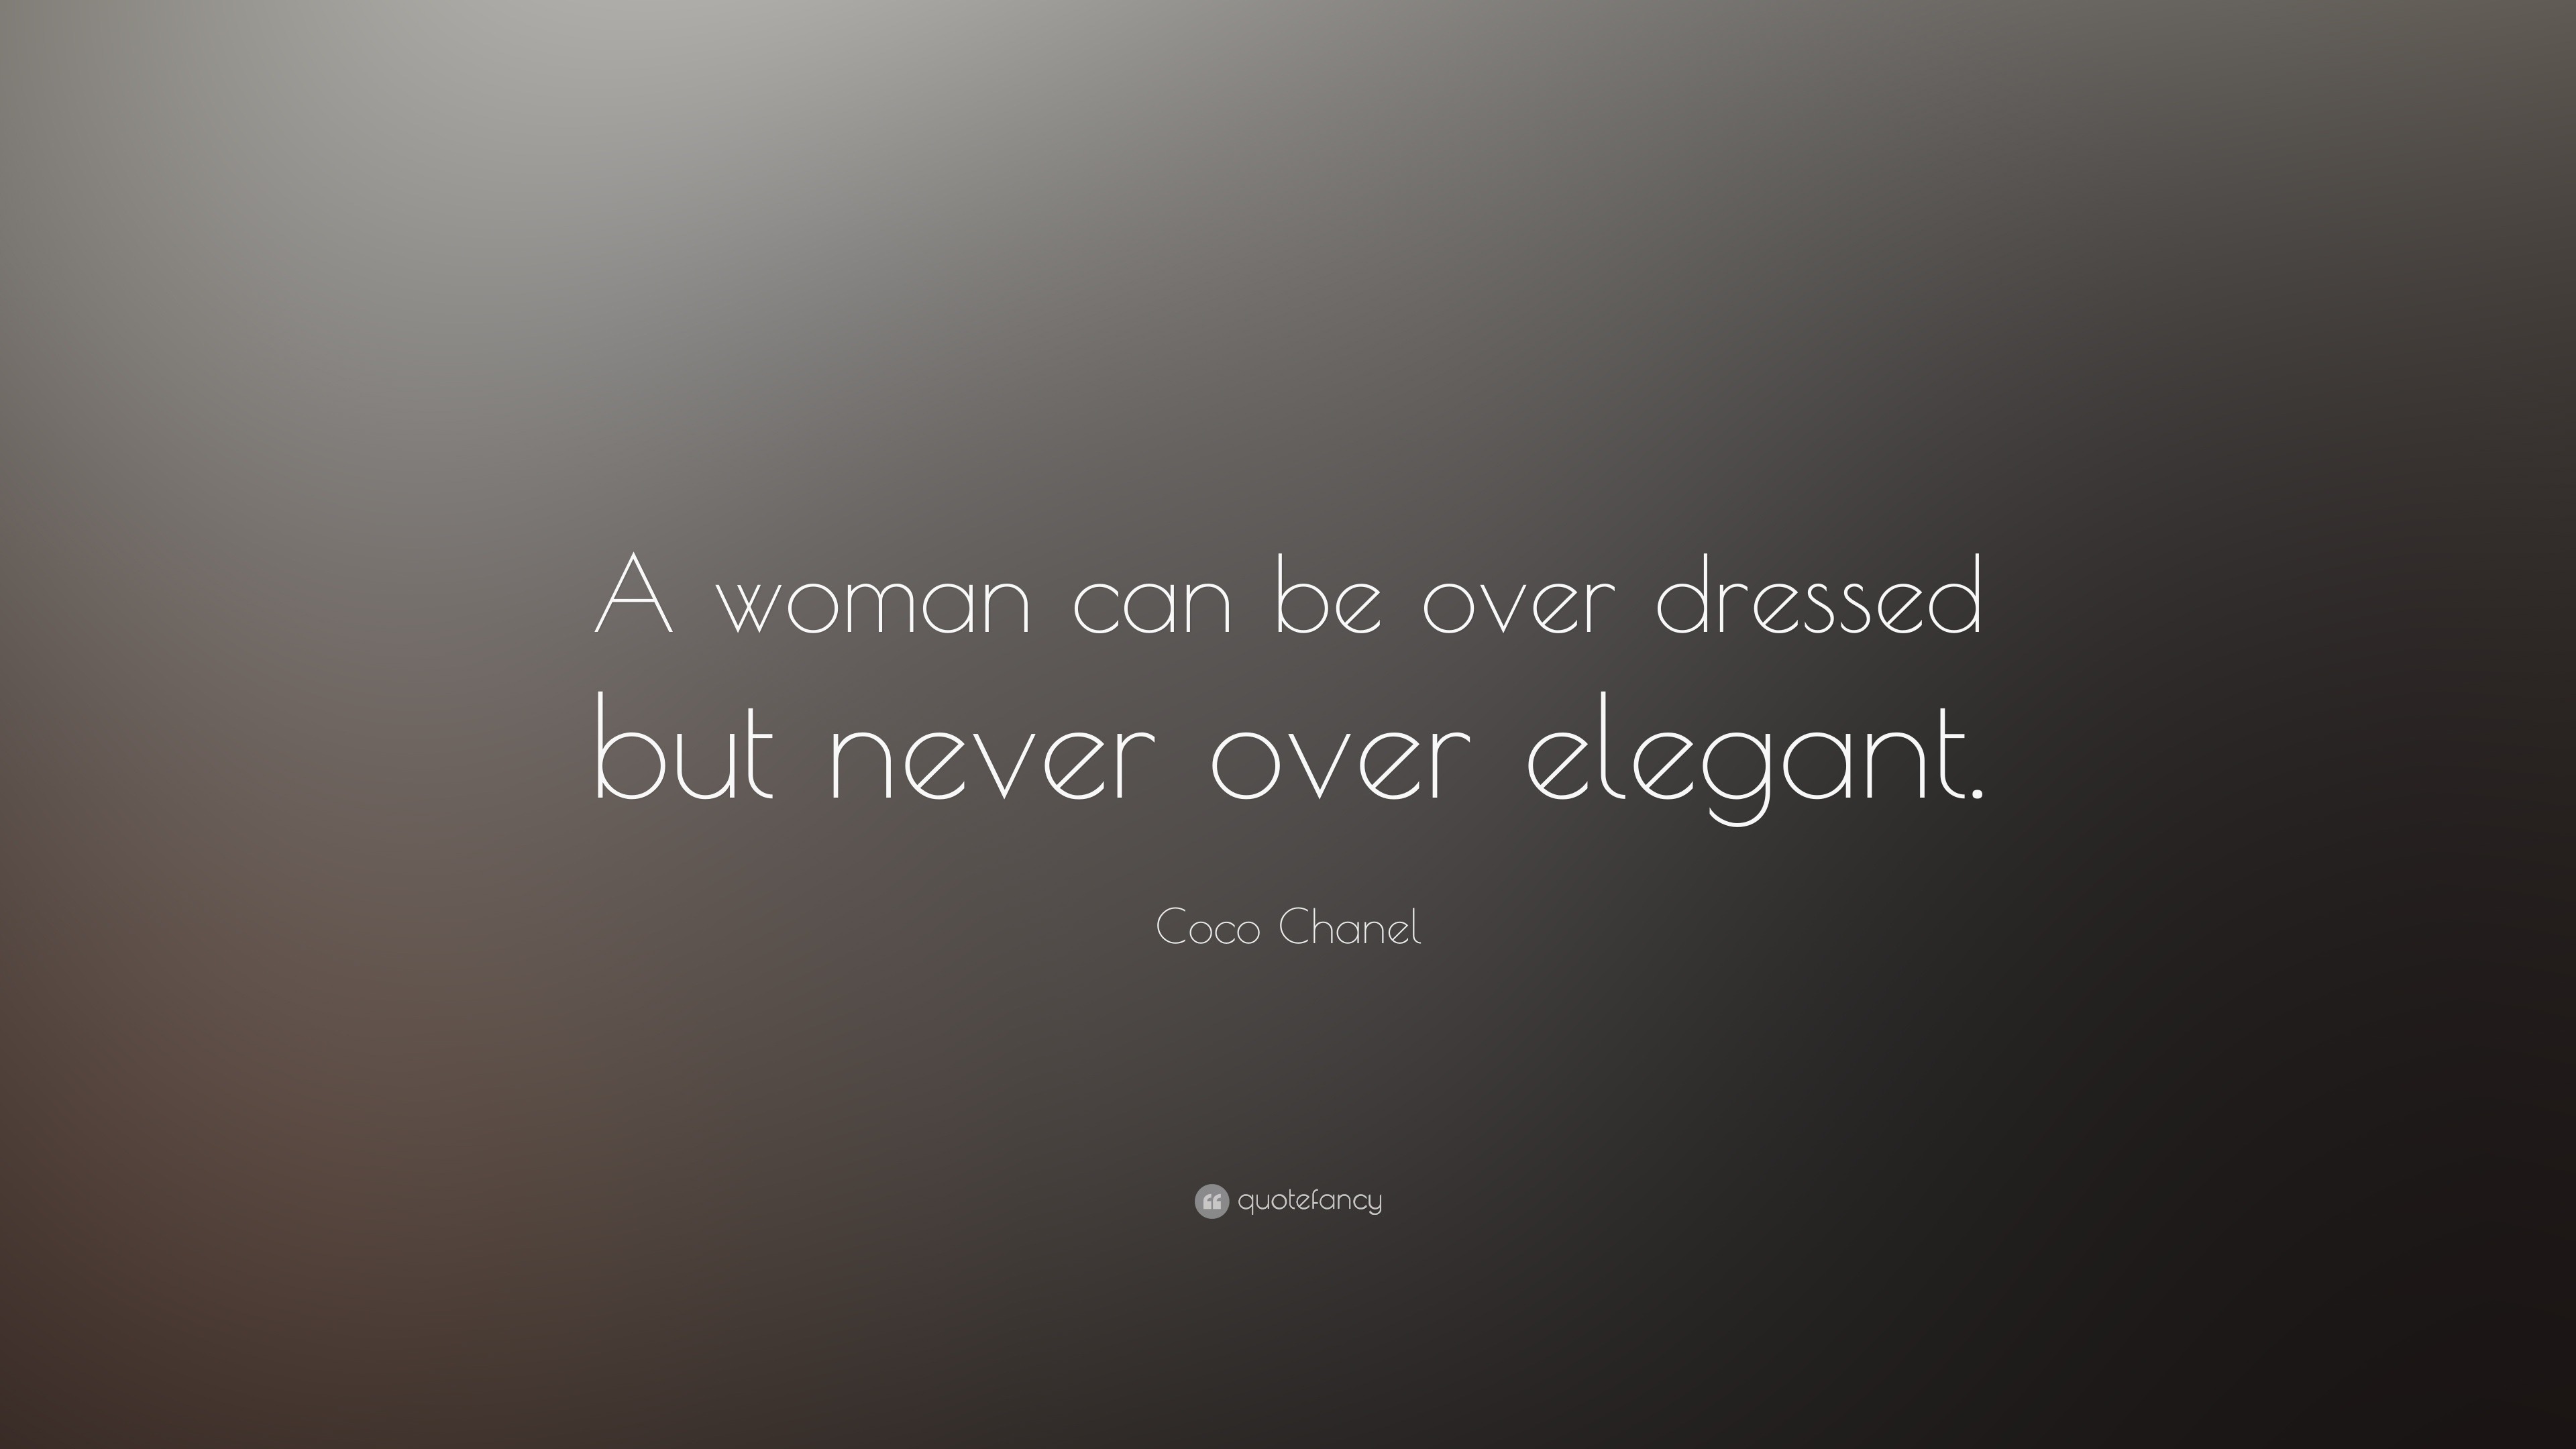 Coco Chanel Quote: “A woman can be over dressed but never over elegant.”